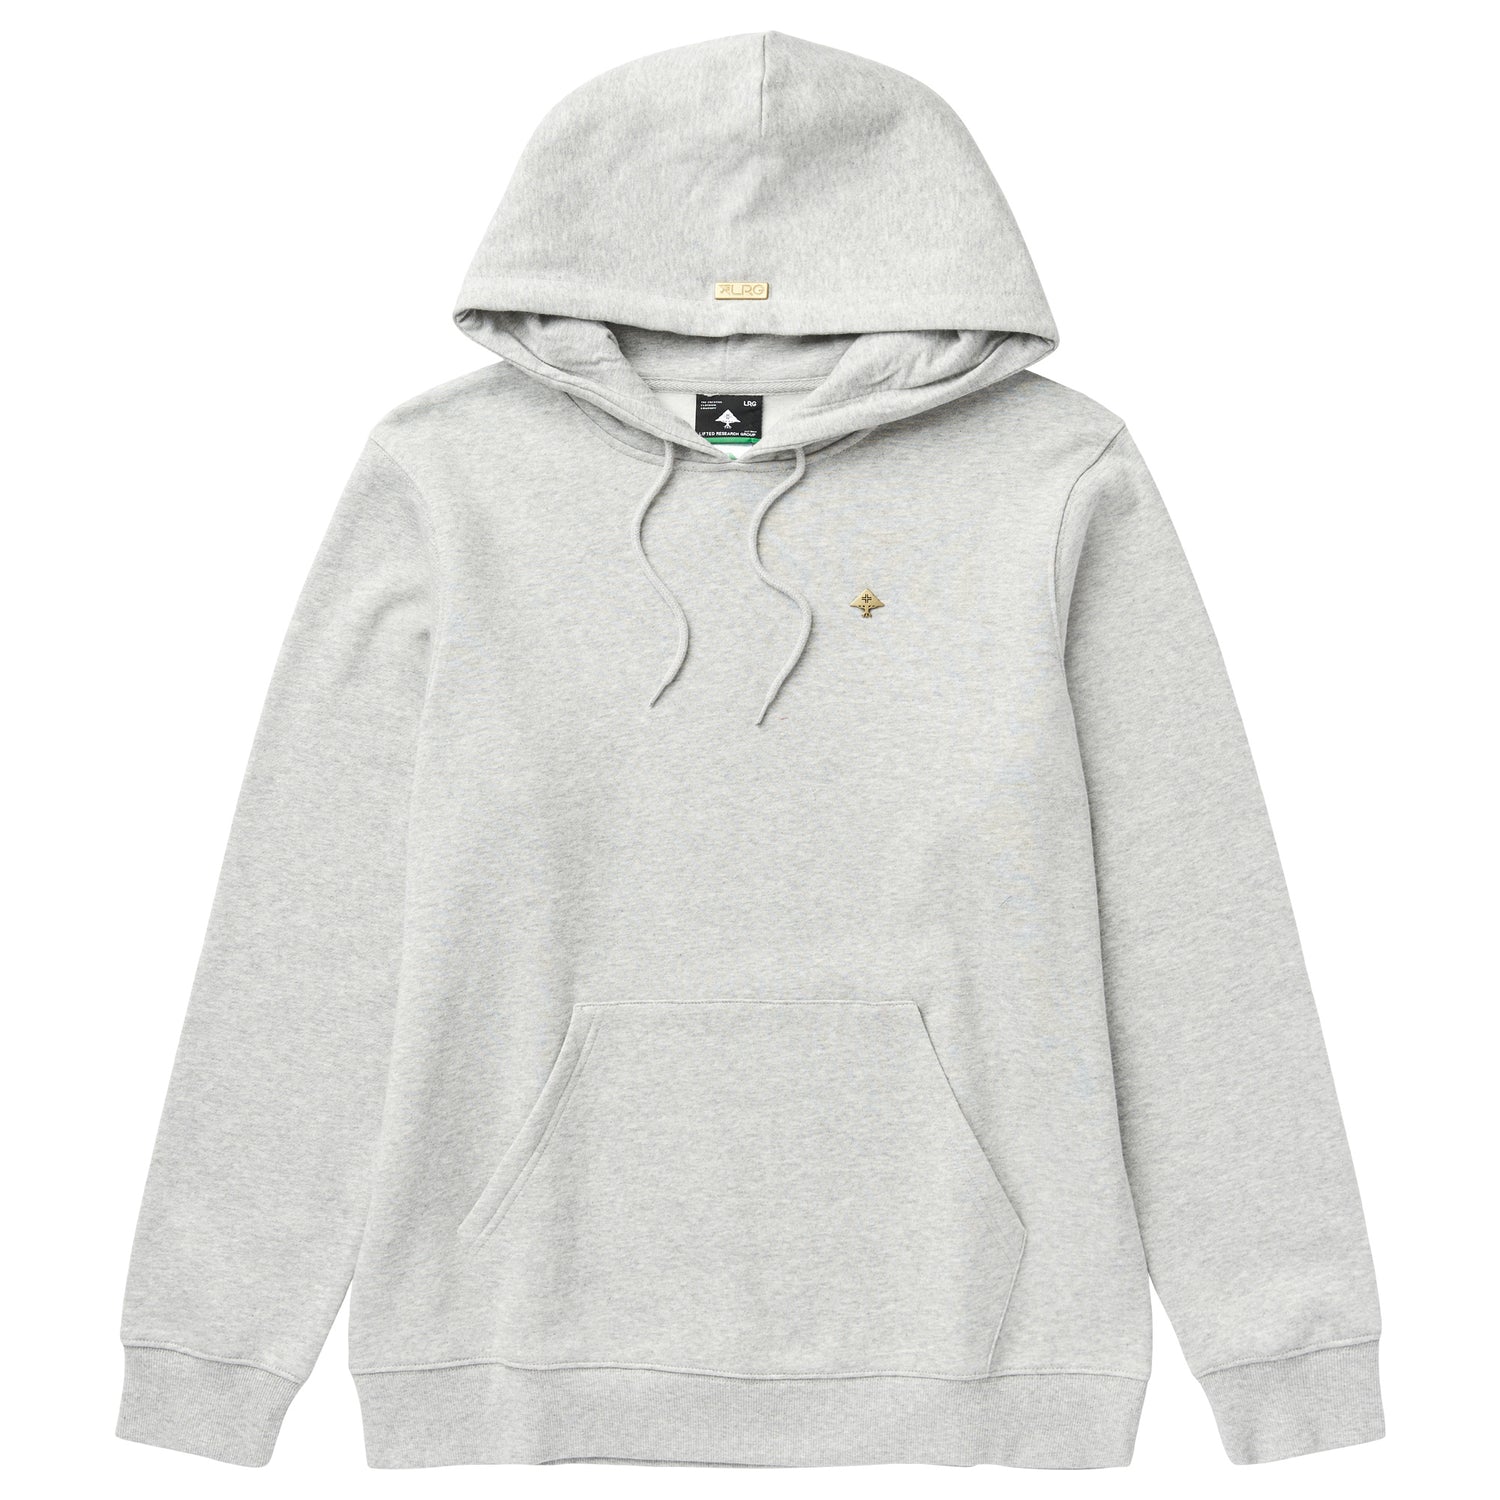 LRG NOTHING BUT GOLD HOODIE GREY HEATHER | LRG Clothing